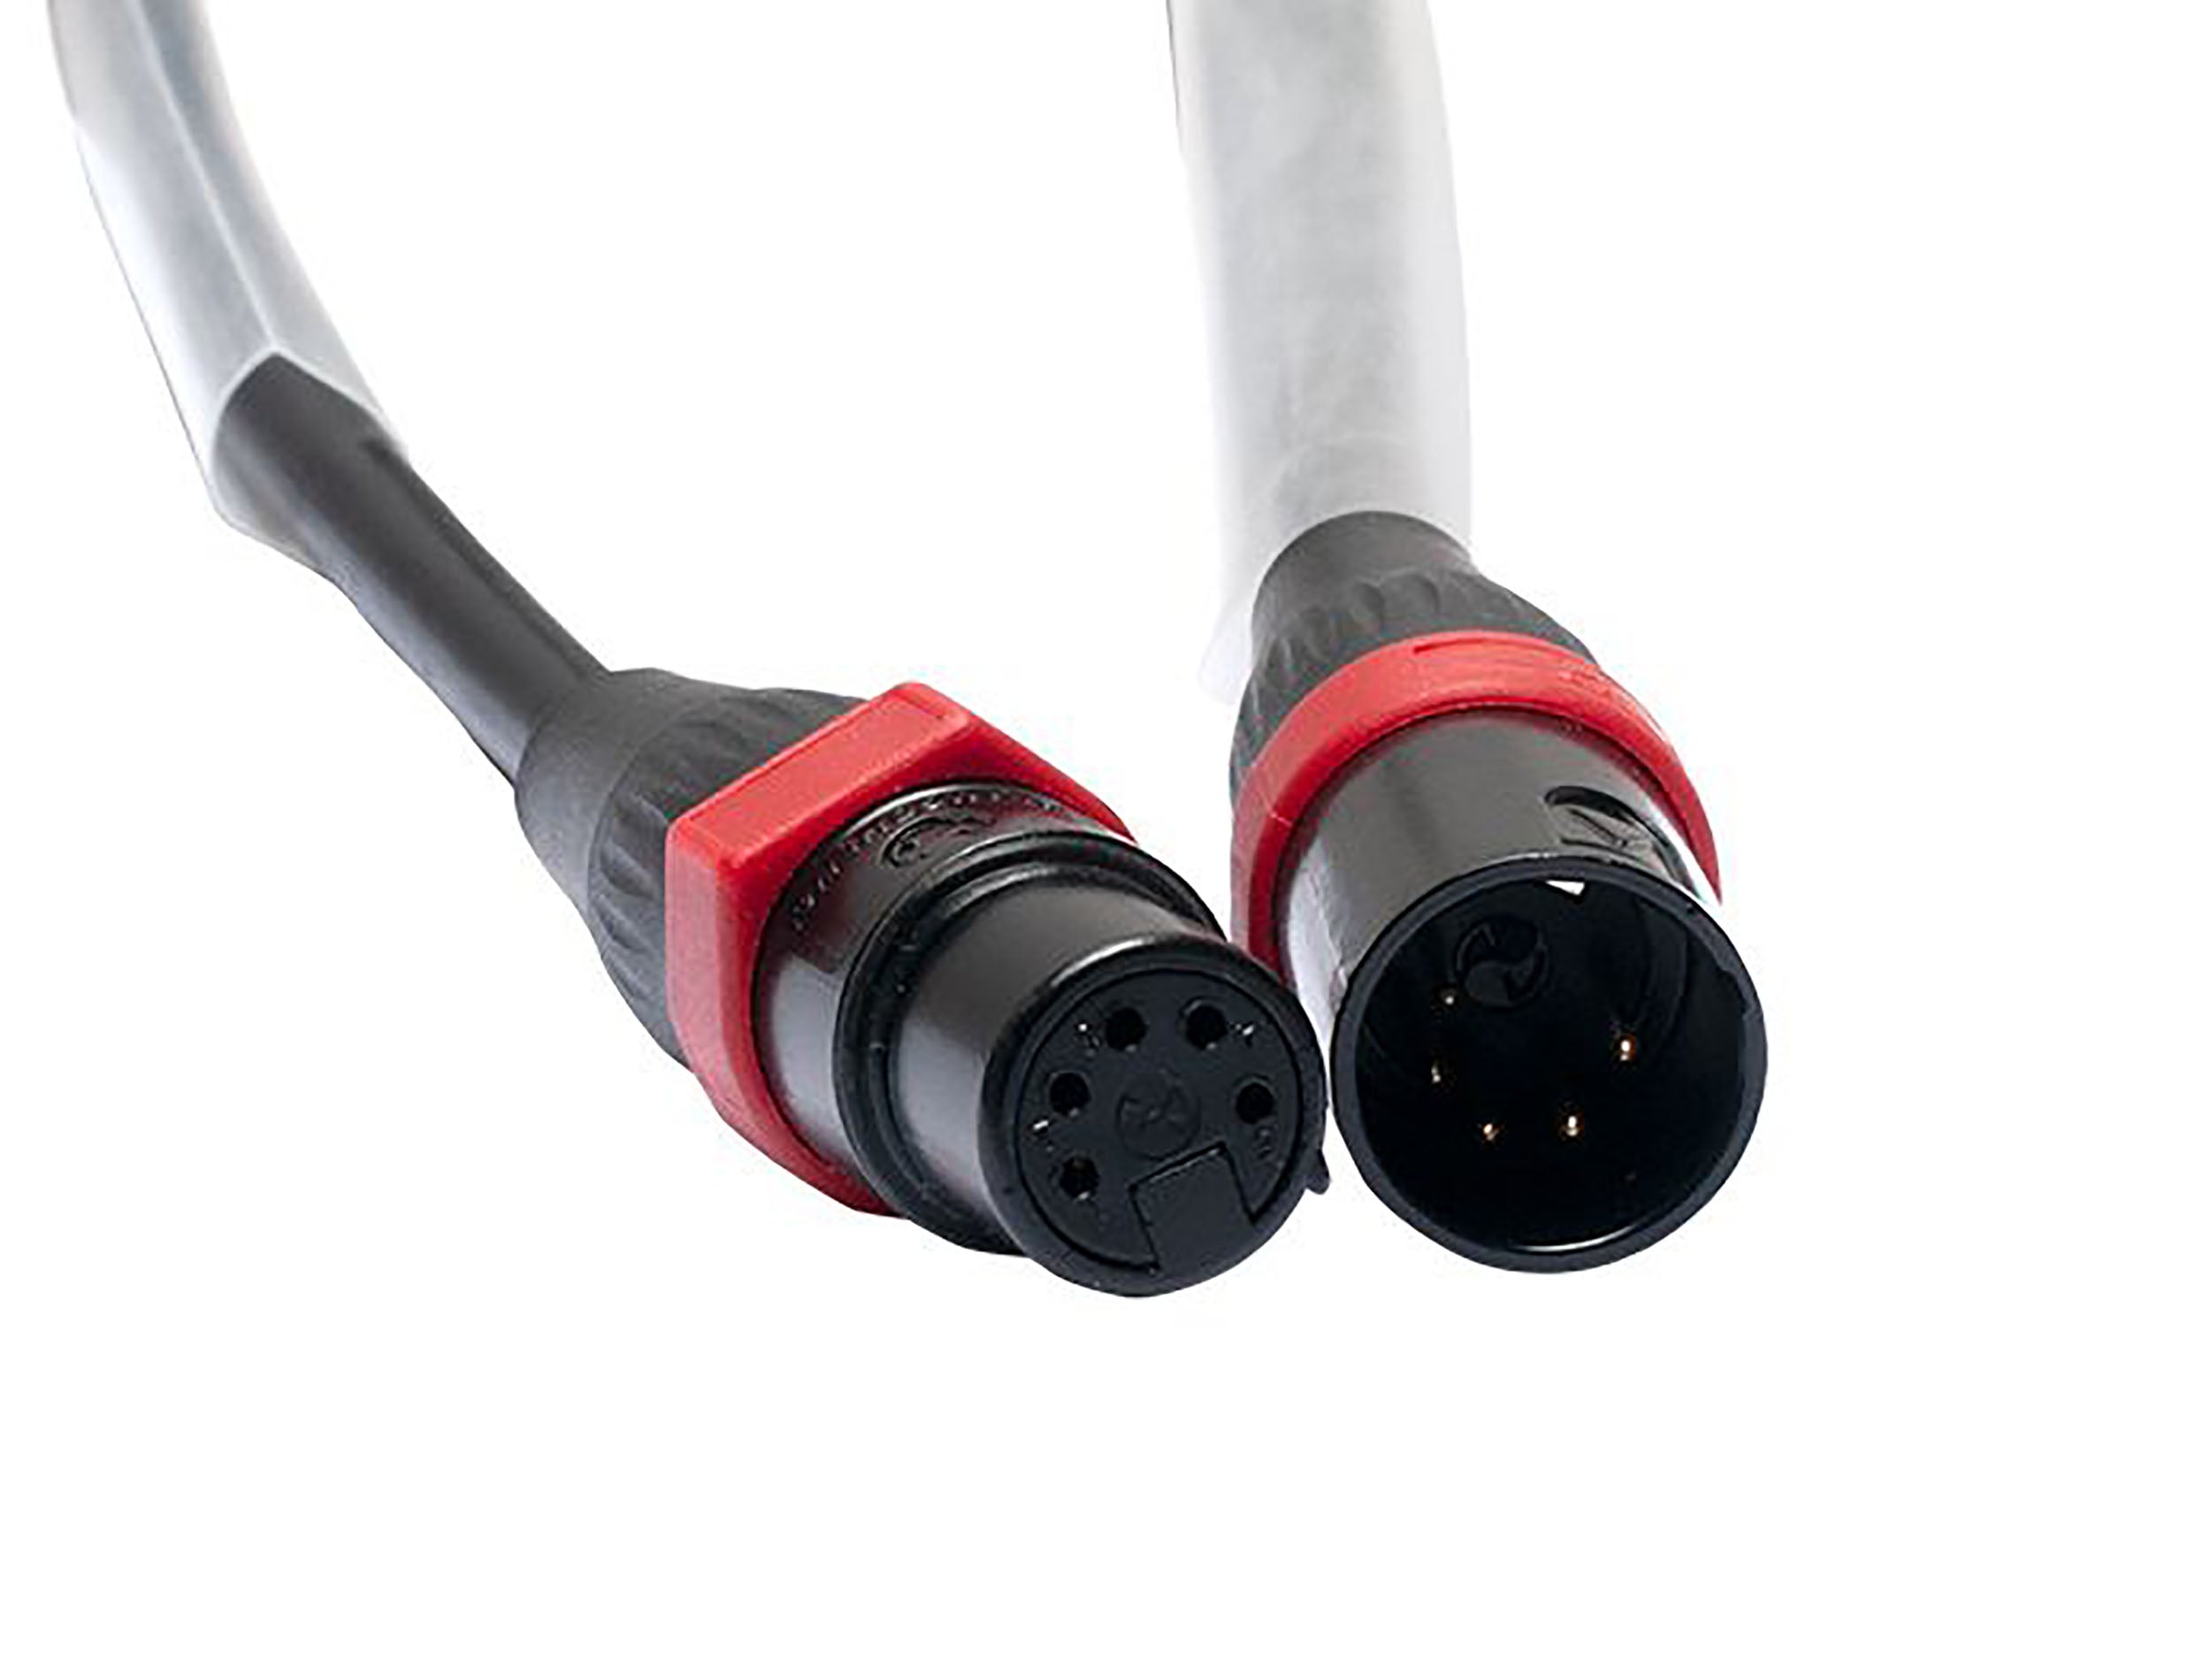 Accu-Cable AC5PDMX5PRO, Pro Series 5-Pin Male to 5-Pin Female Connection DMX Cable - 5 Ft by Accu Cable